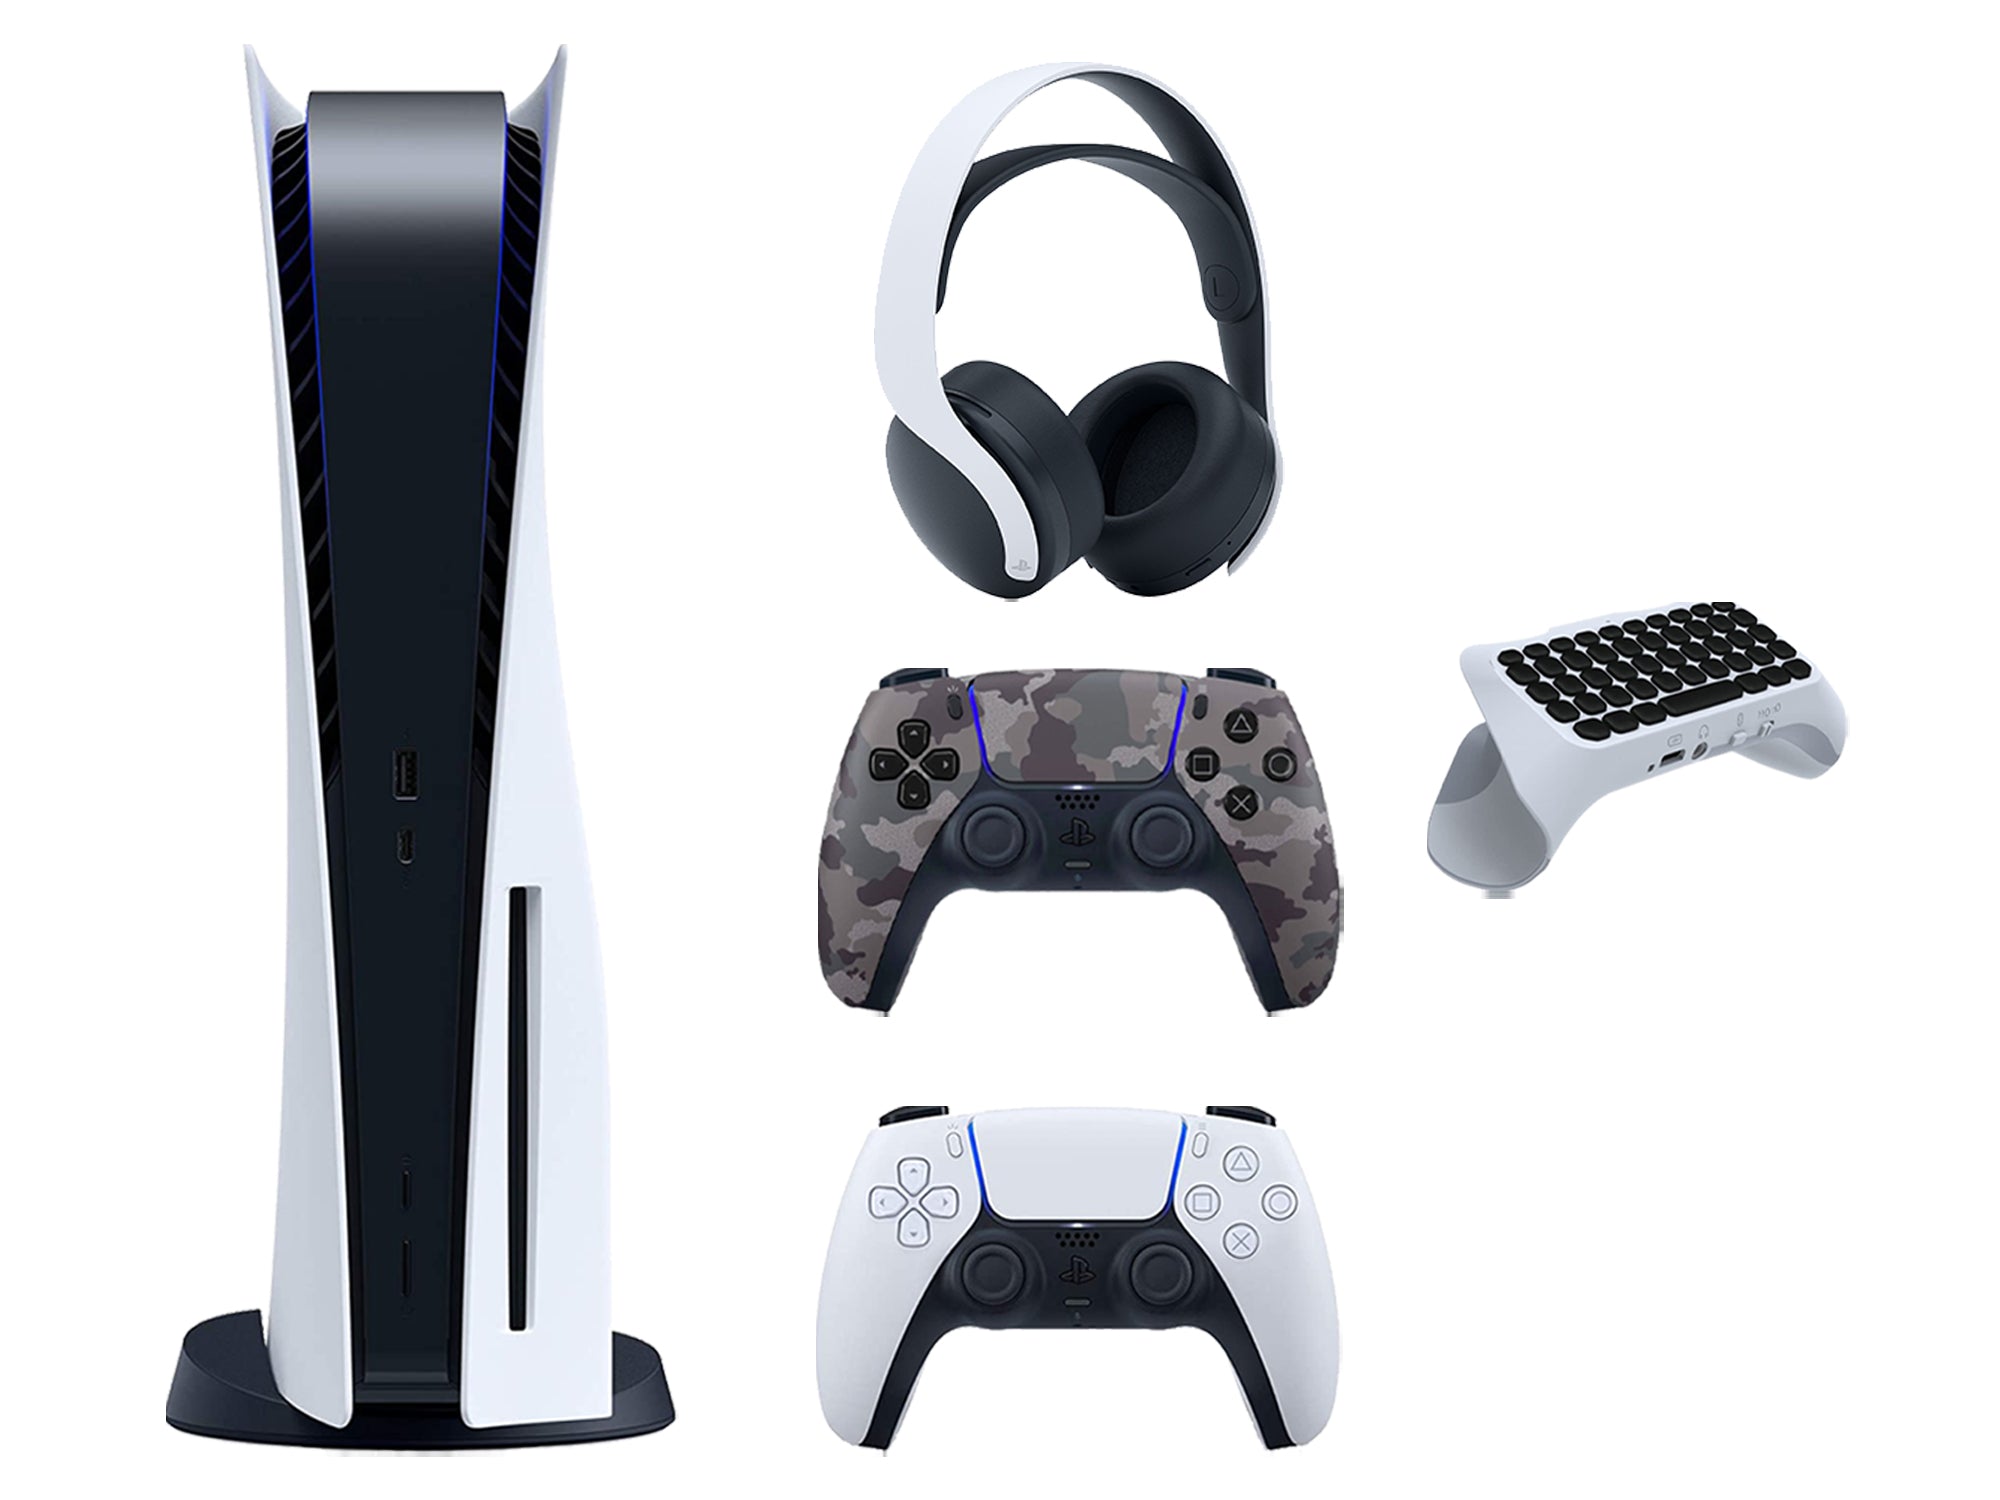 Sony Playstation 5 Disc Edition Bundle with Extra Gray Camo Controller, White PULSE 3D Wireless Headset and QuickType Keypad - Pro-Distributing